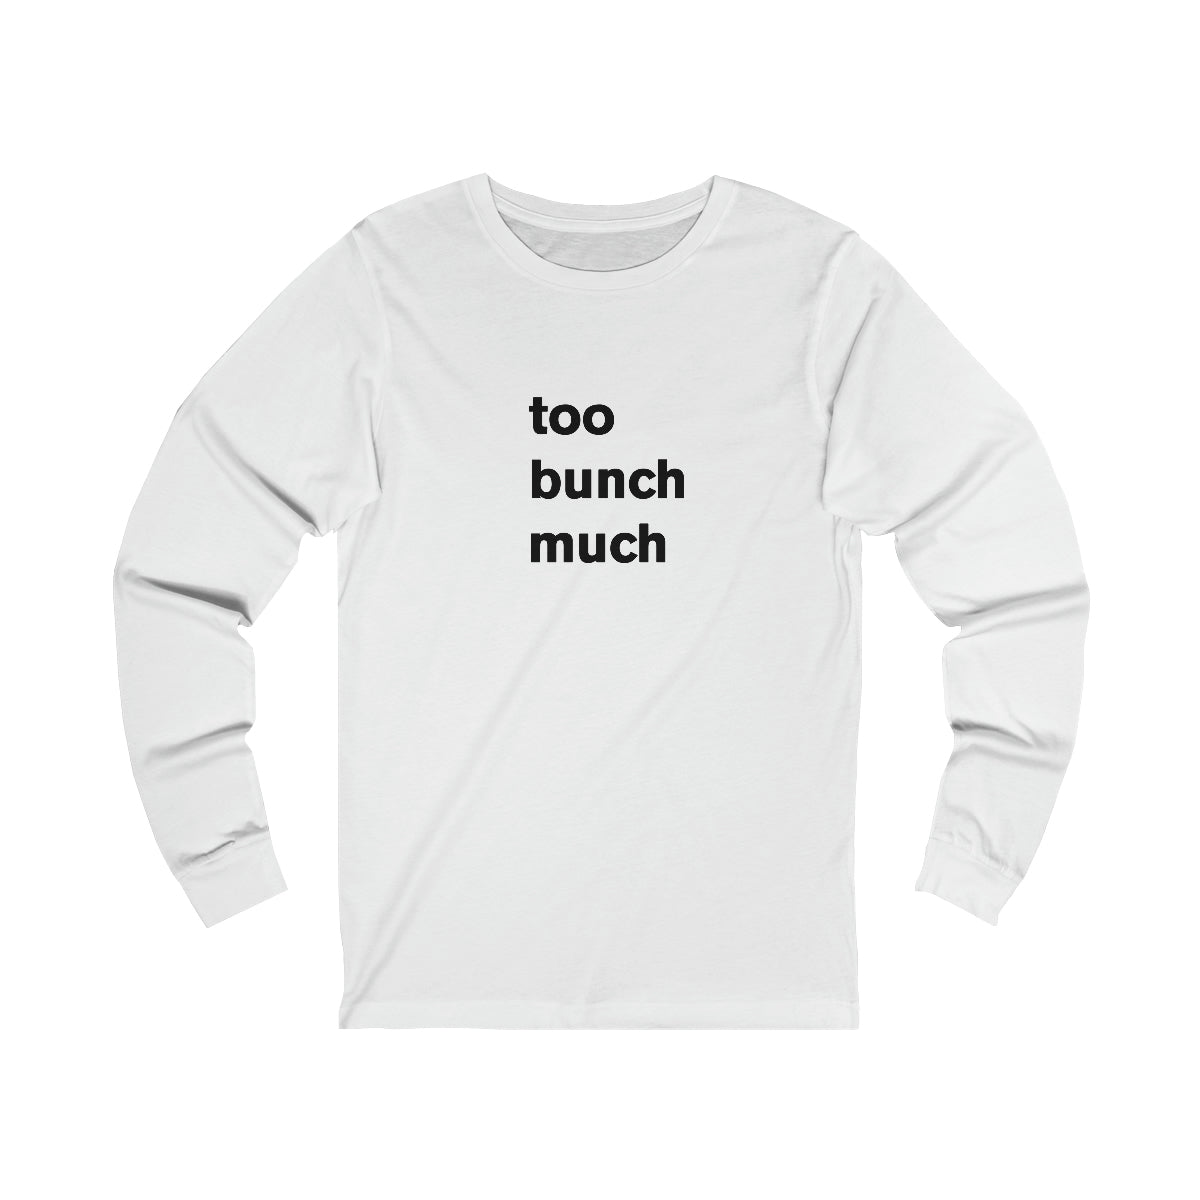 too bunch much - long sleeve